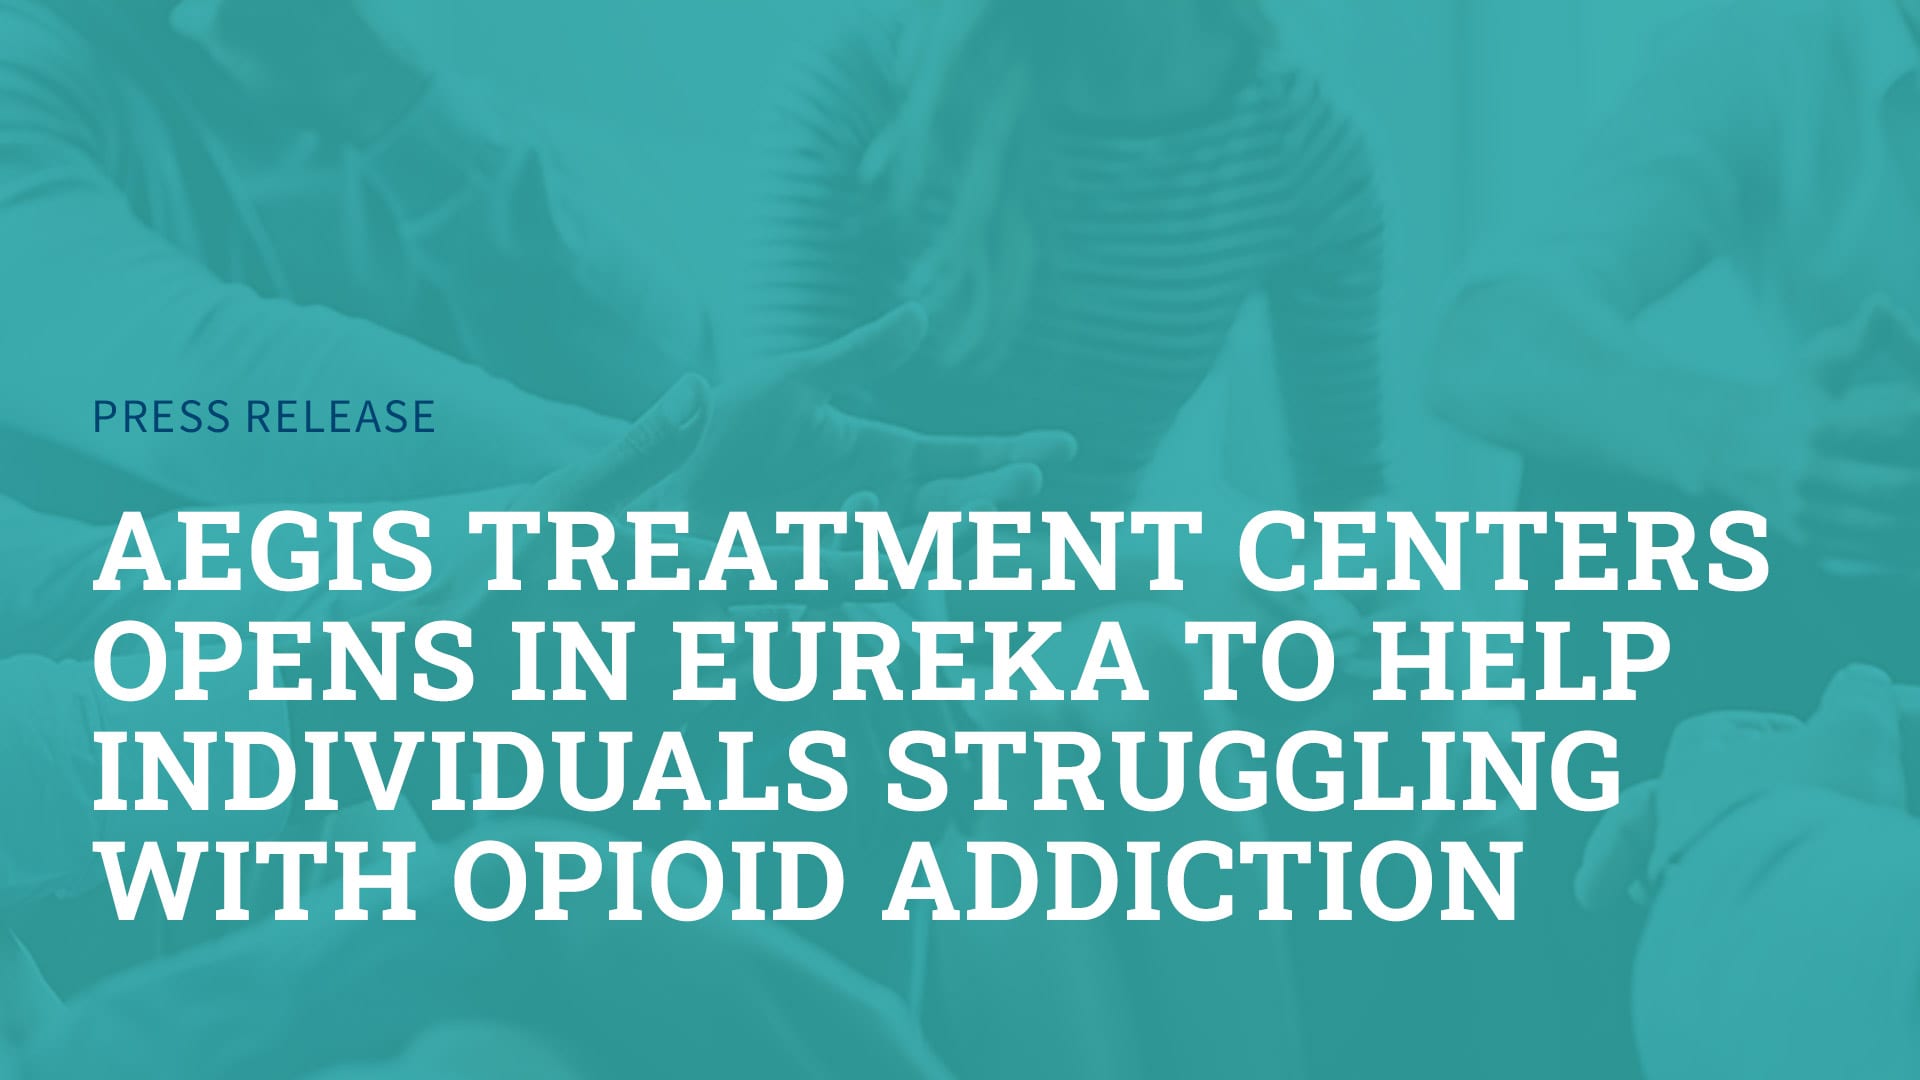 Aegis Treatment Centers Opens in Eureka to Help Individuals Struggling with Opioid Addiction